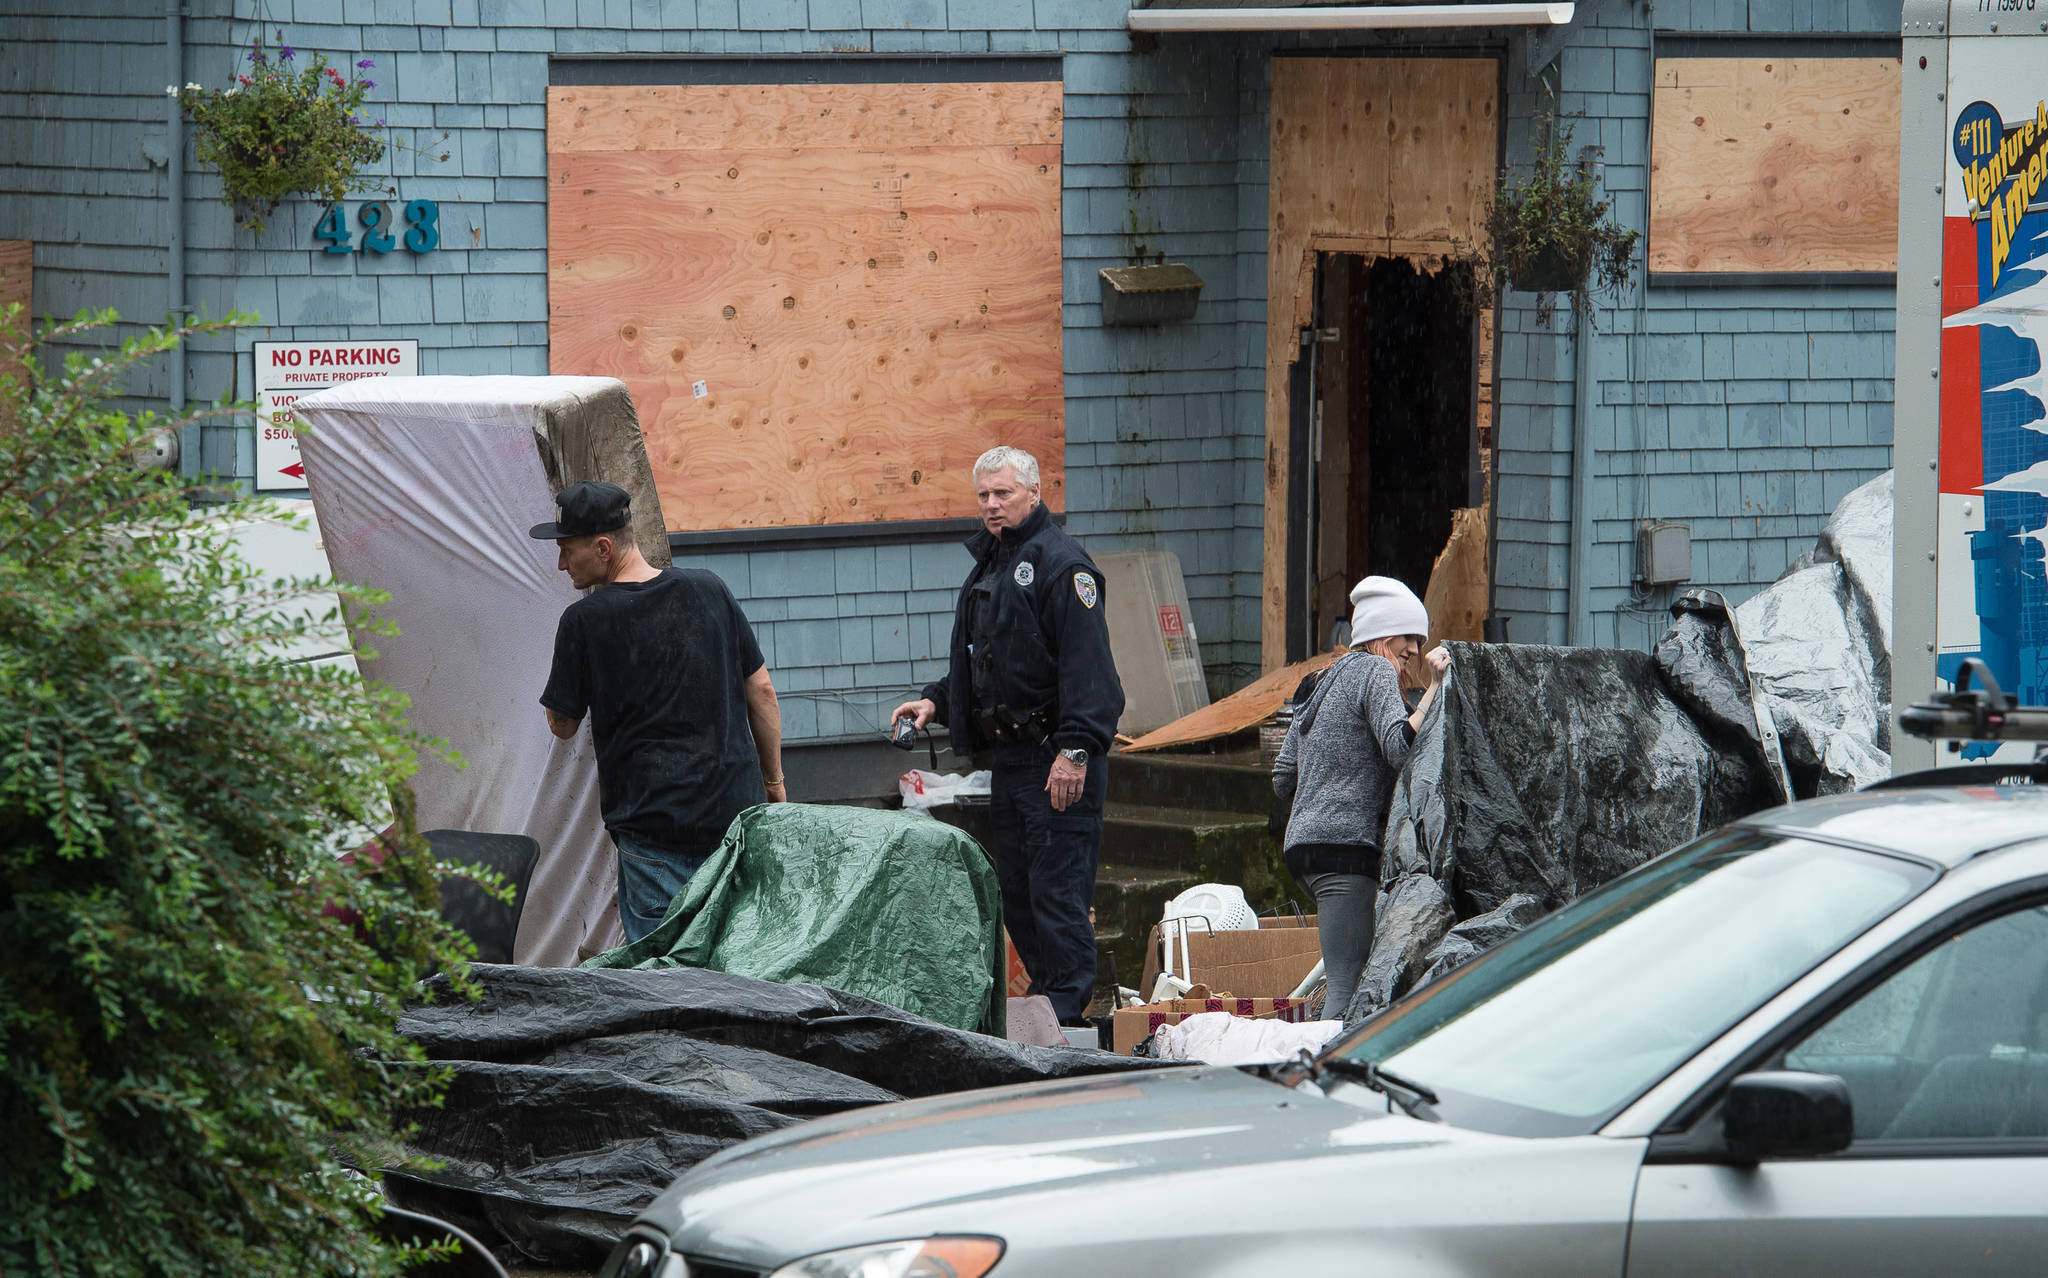 Two houses owned by Kathleen Barrett are shown boarded up on Friday, Sept. 8, 2017. Police were called after renters kicked one door in to gain access to the building. (Michael Penn | Juneau Empire)